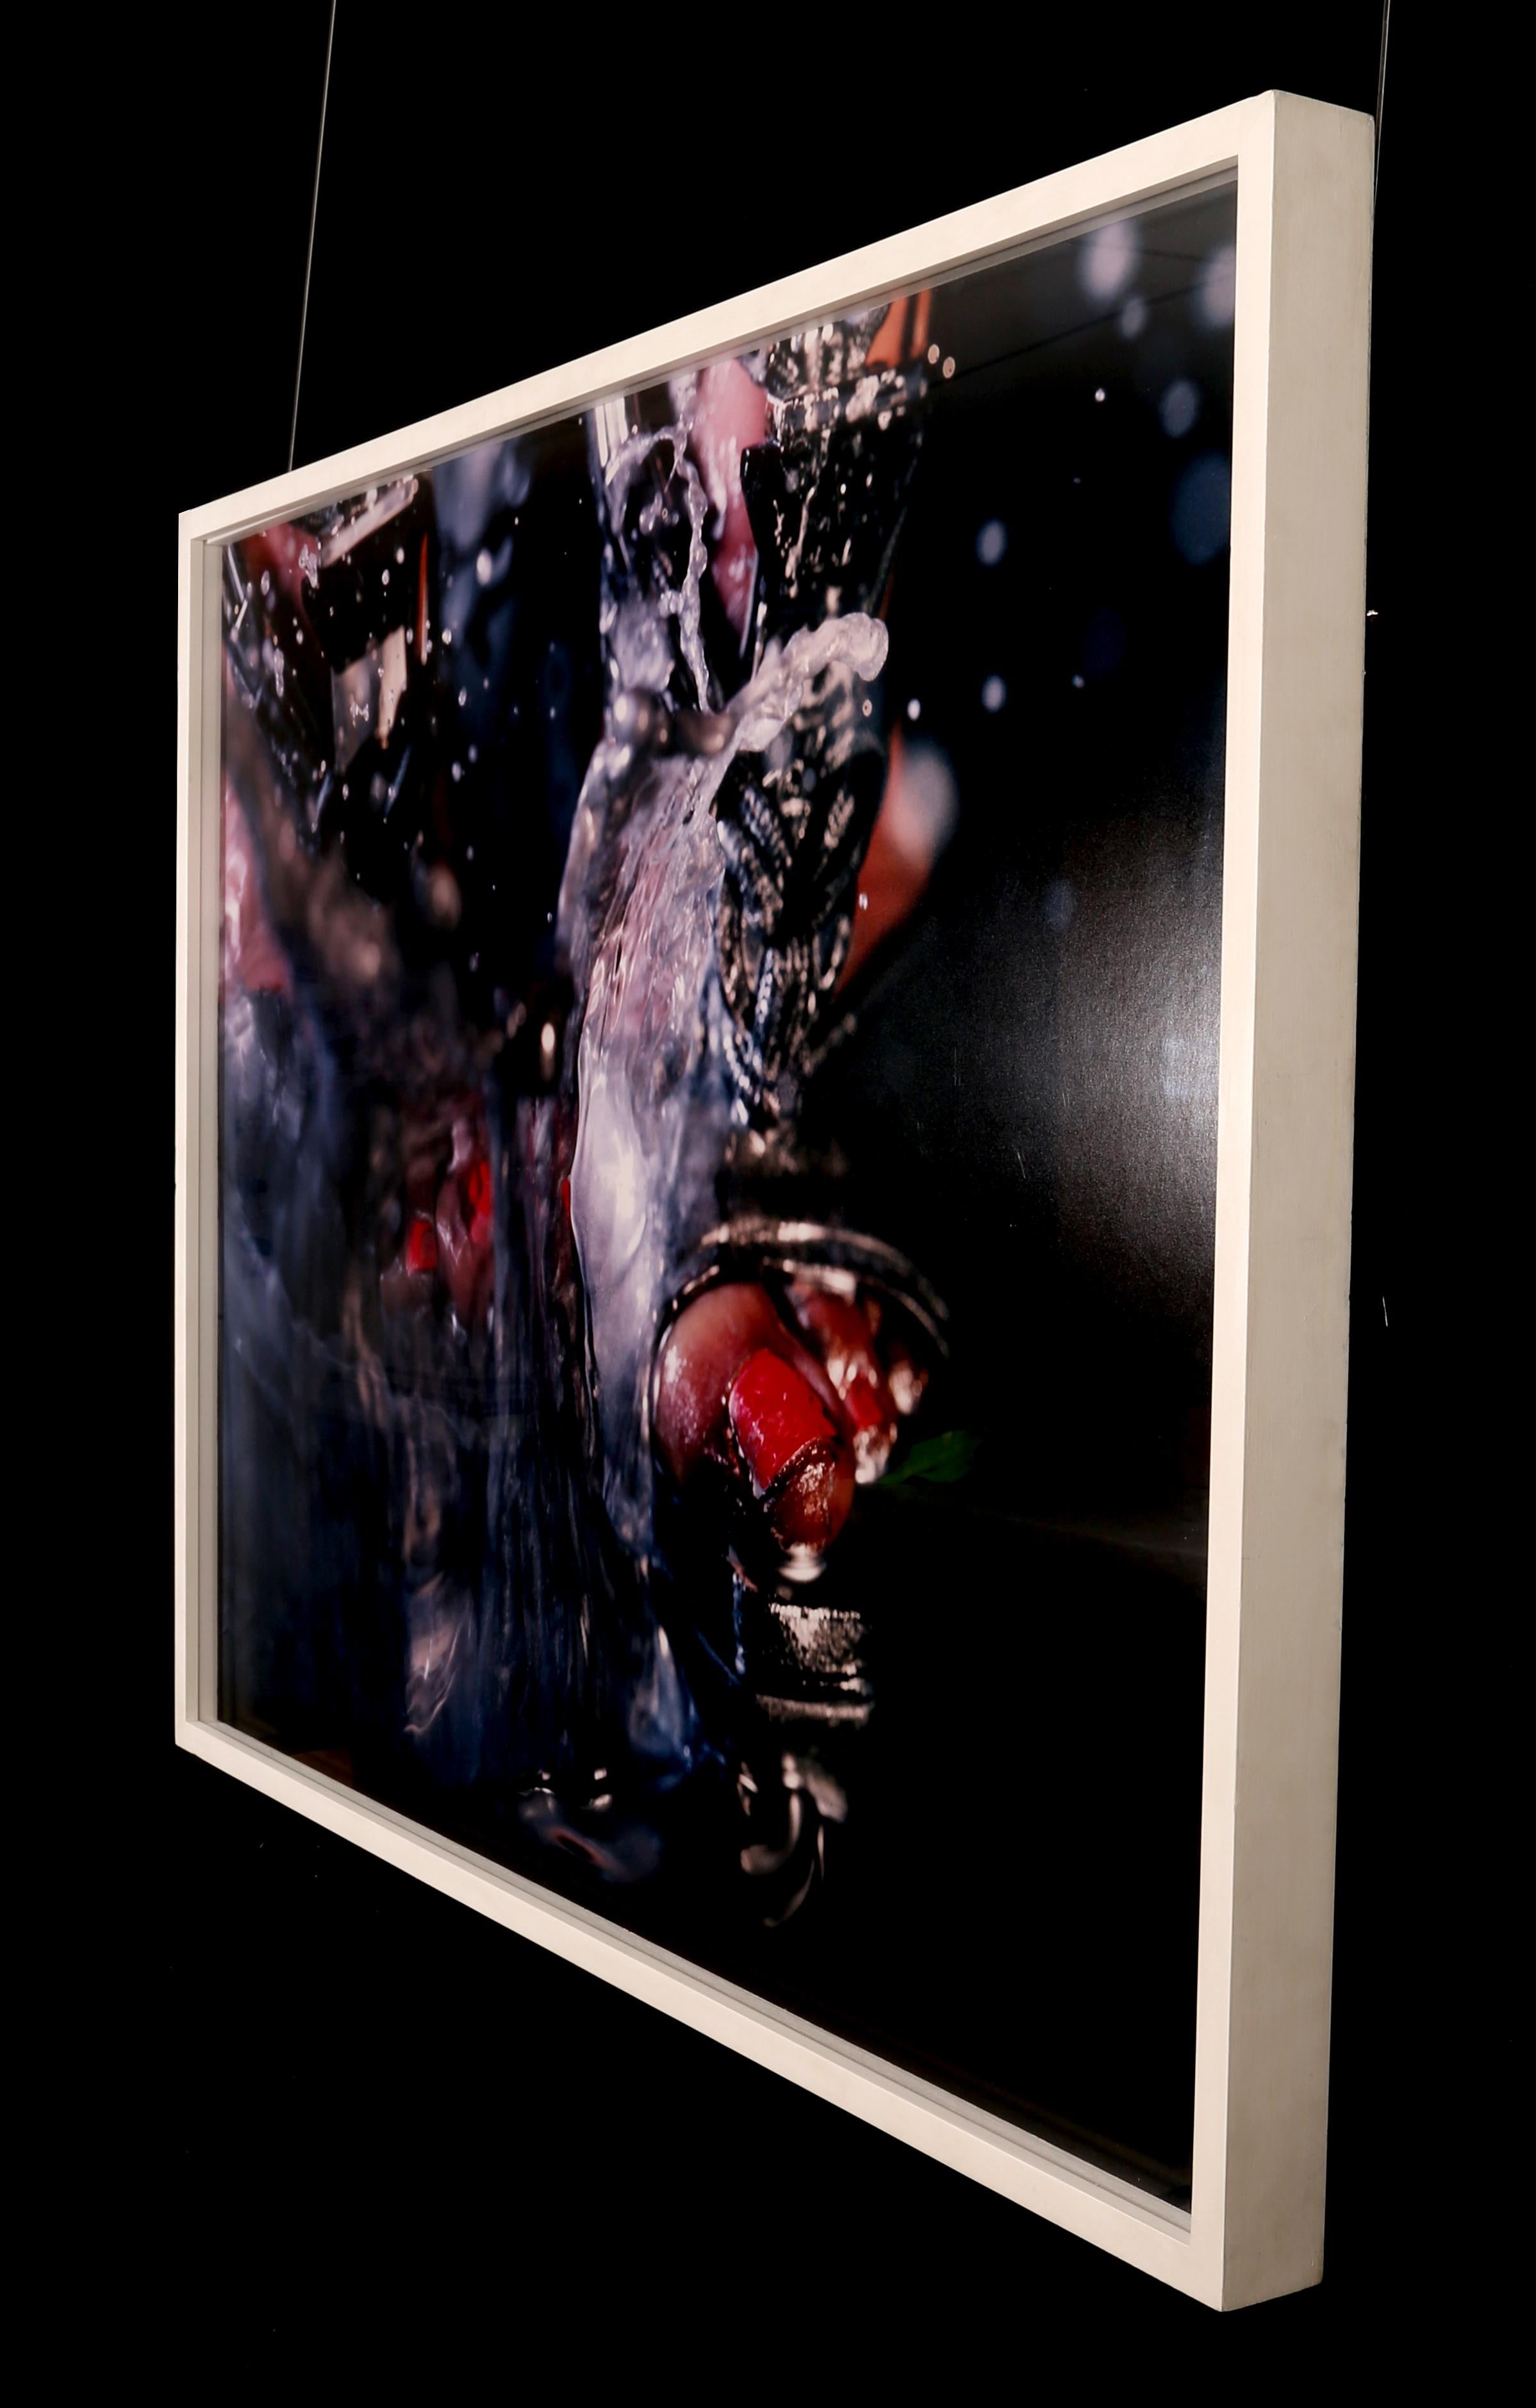 Marilyn Minter
Swell, 2010
Chromogenic print
Framed Dimensions: 32 x 42 inches  (81.3 x 106.7 cm)
Edition of 5